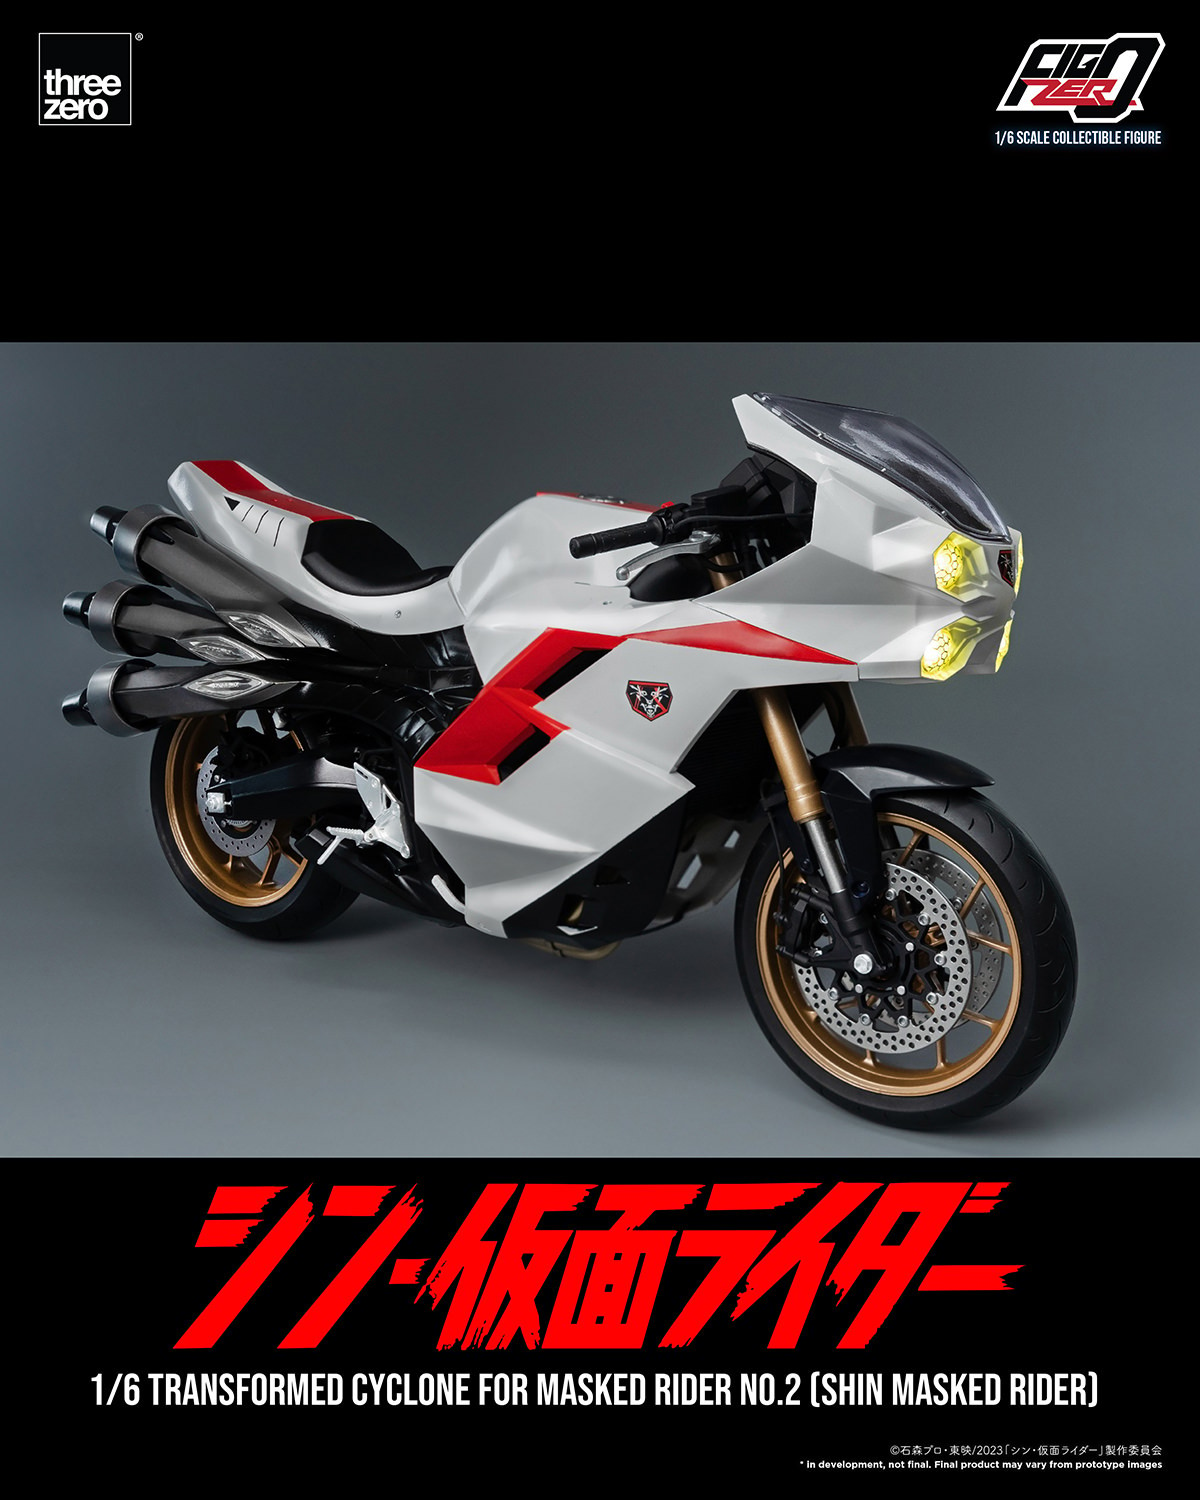 Transformed Cyclone for Masked Rider No. 2 (Shin Masked Rider) (Prototype Shown) View 9